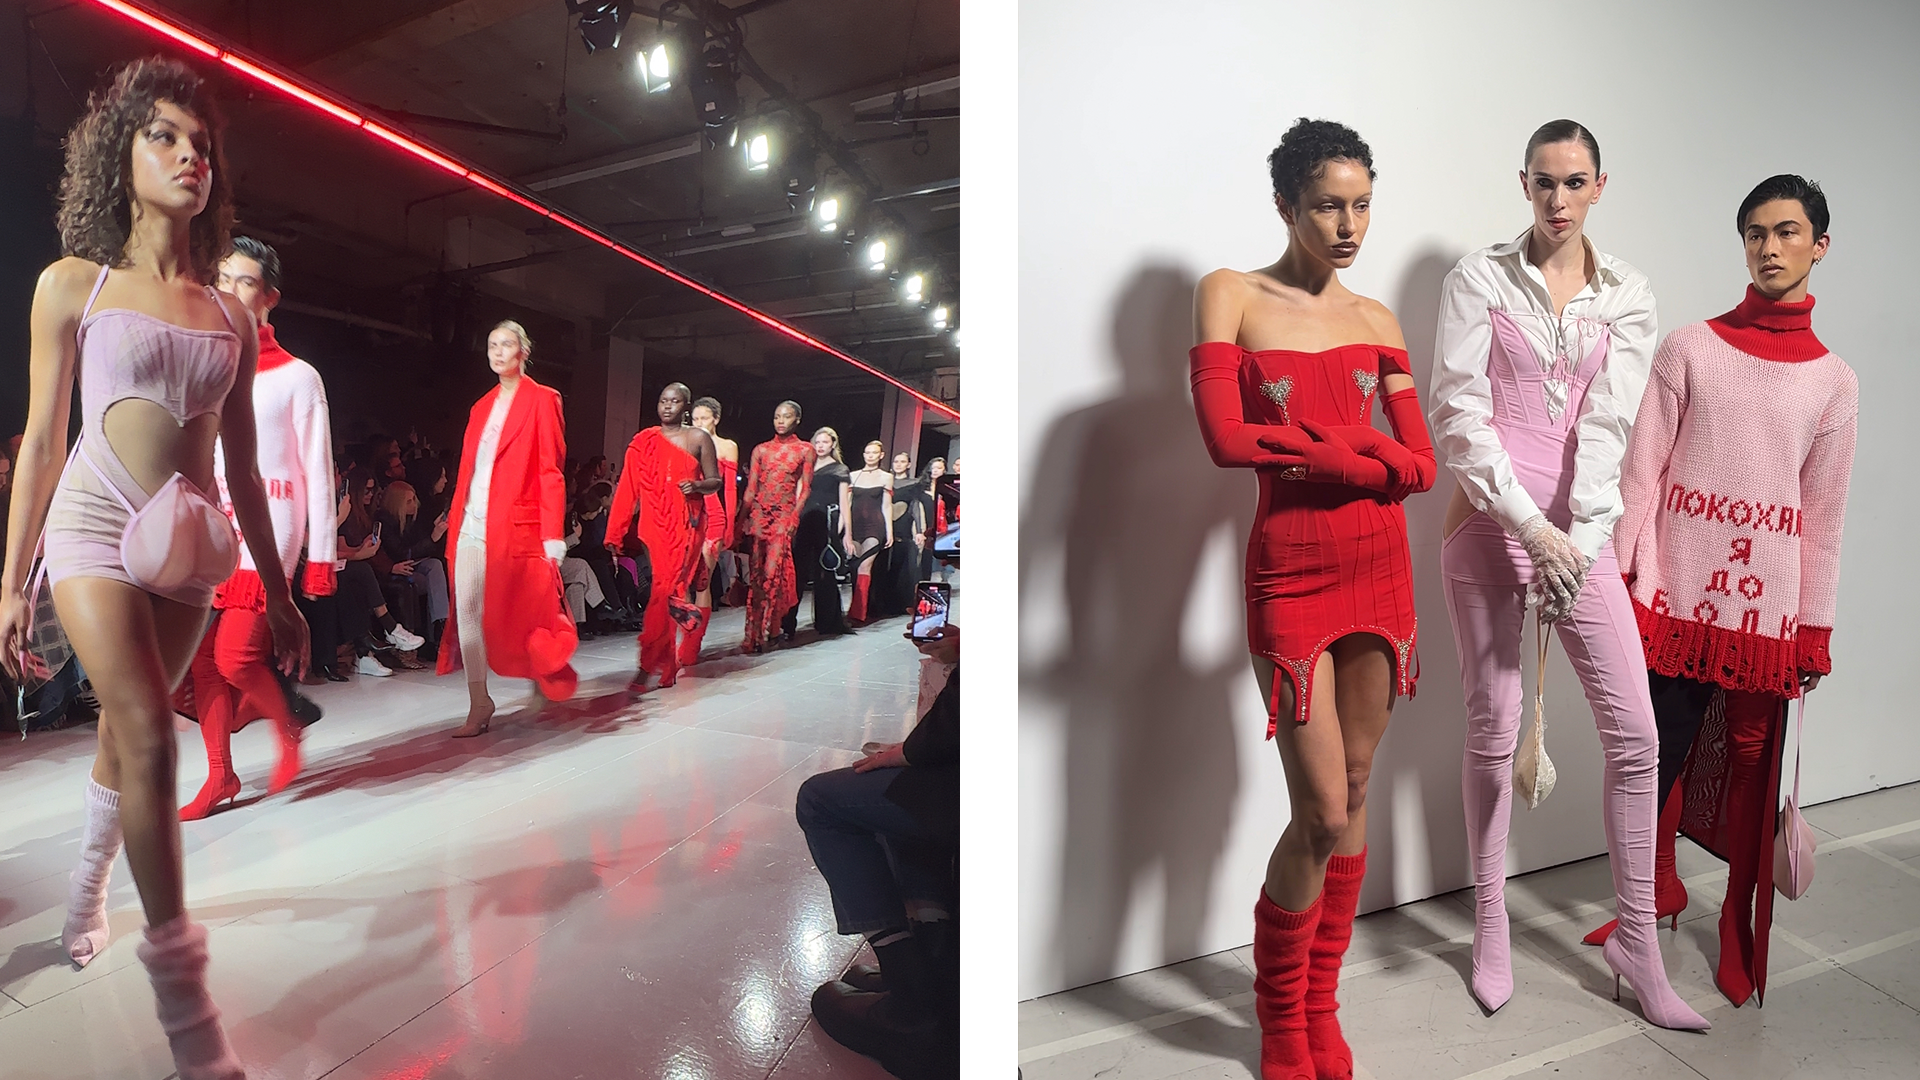 This is our frontline': Ukrainian designers show at London Fashion